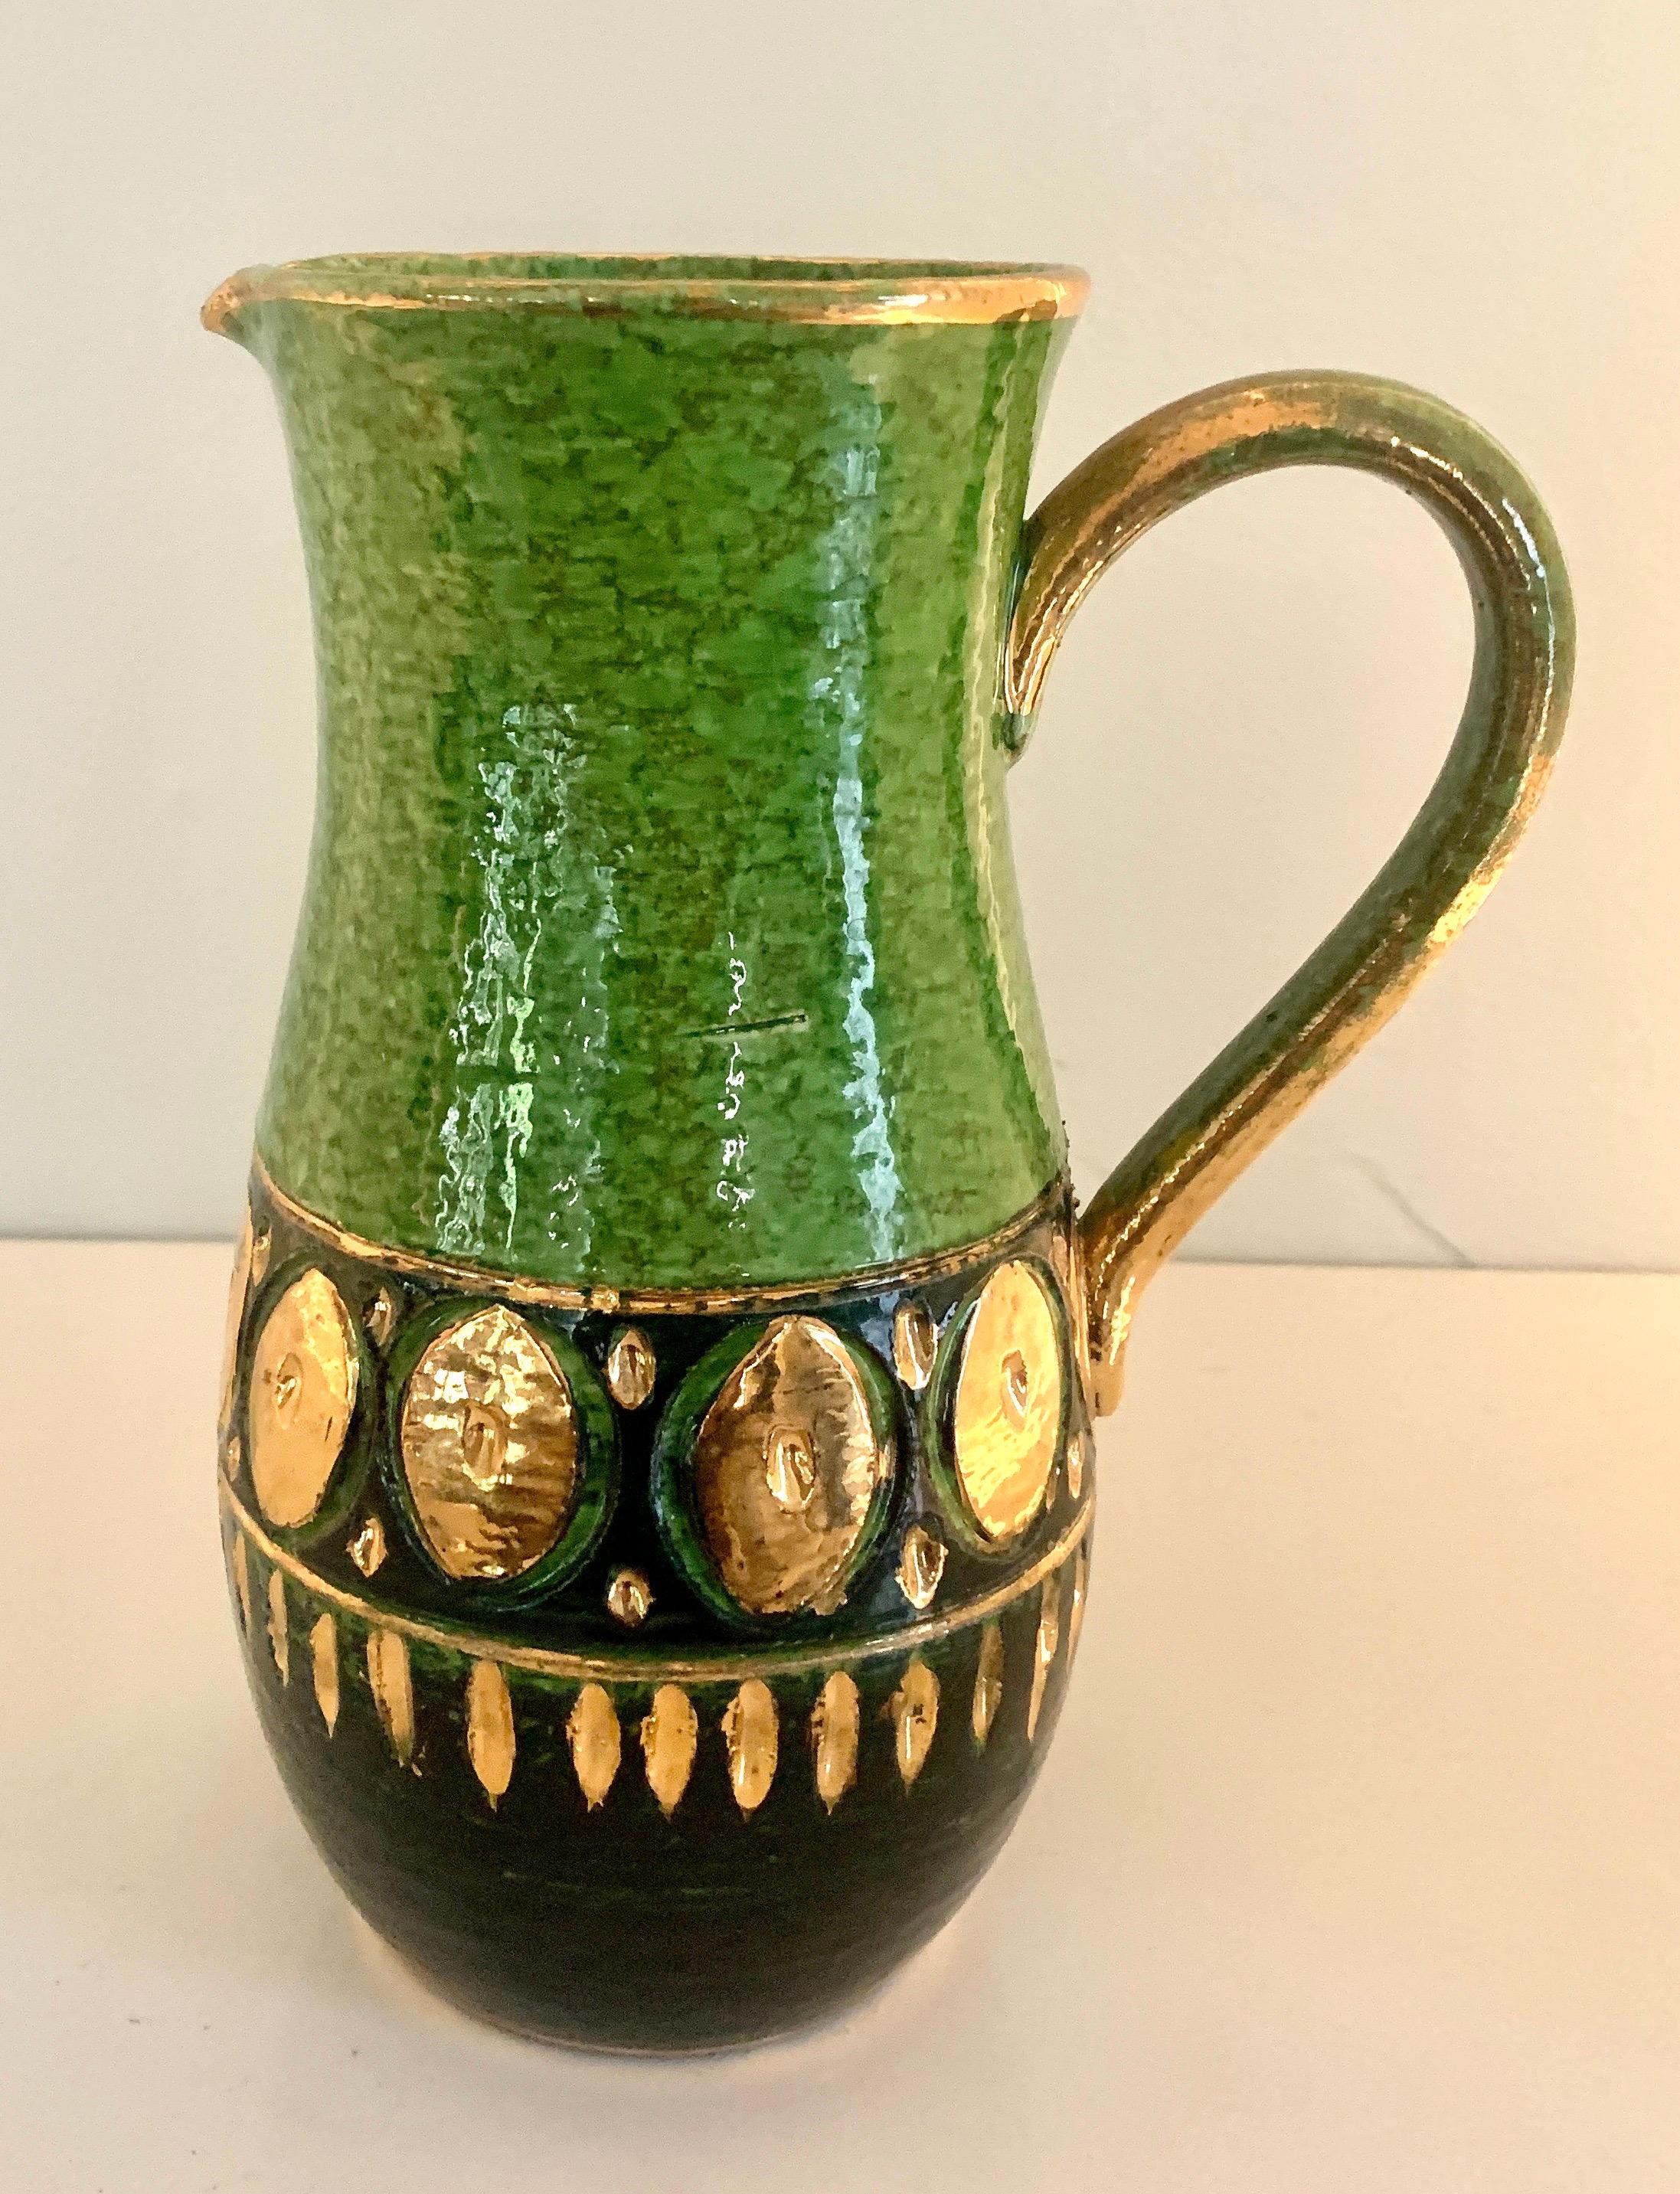 20th Century Italian Bitossi Ceramic Pitcher with Green and Gold Accents